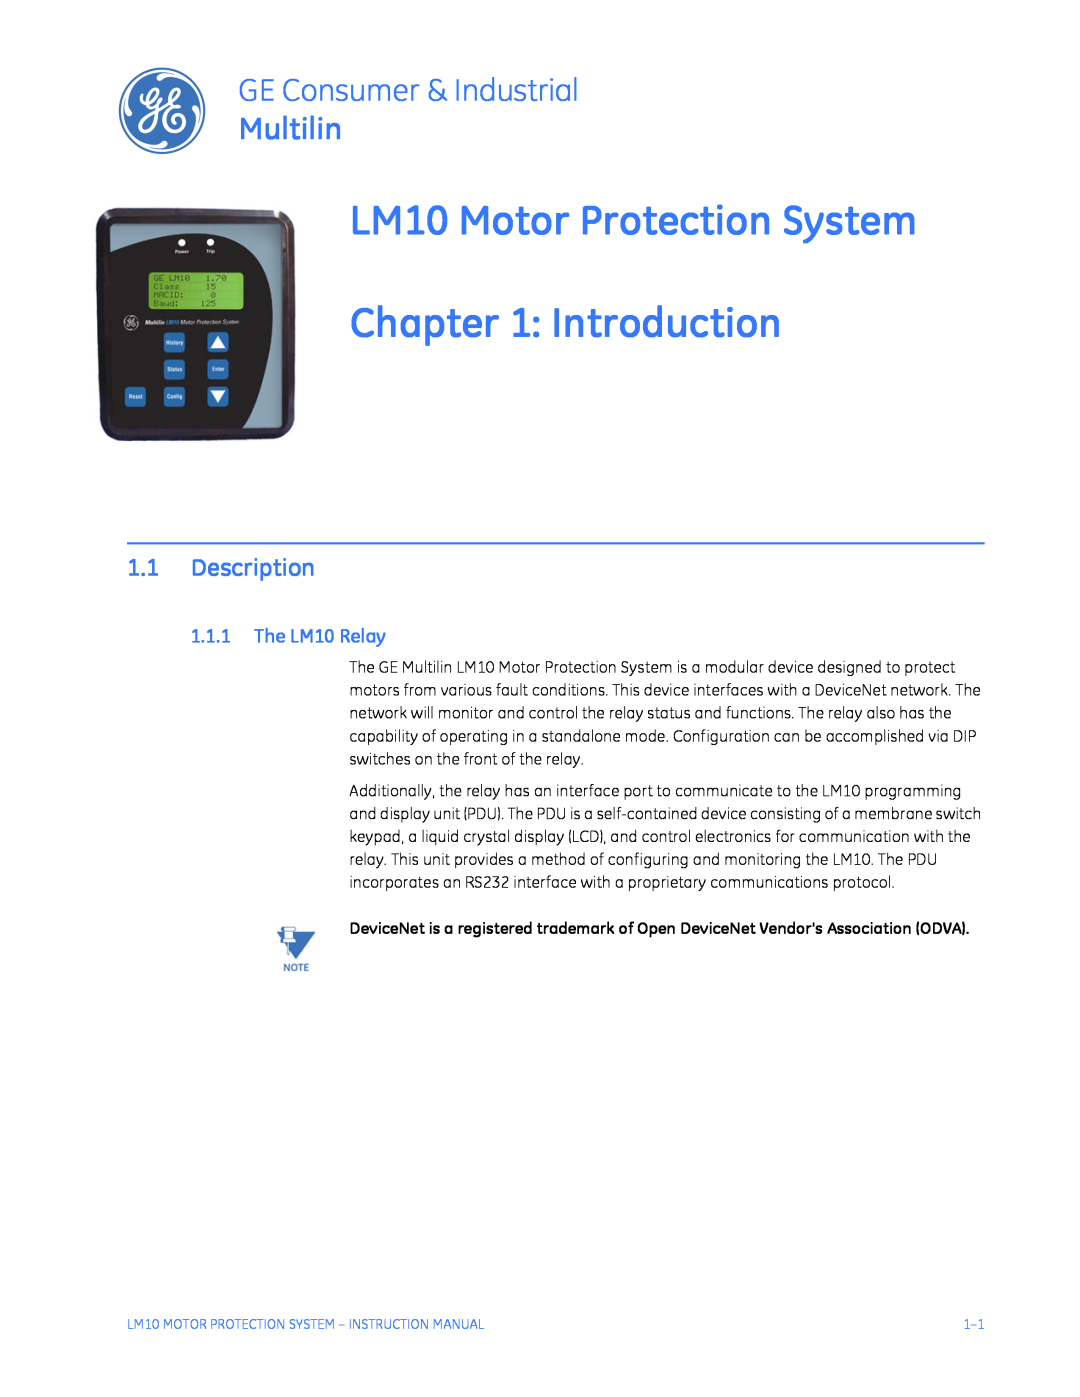 GE LM10 Motor Protection System Introduction, Description, The LM10 Relay, GE Consumer & Industrial, Multilin 